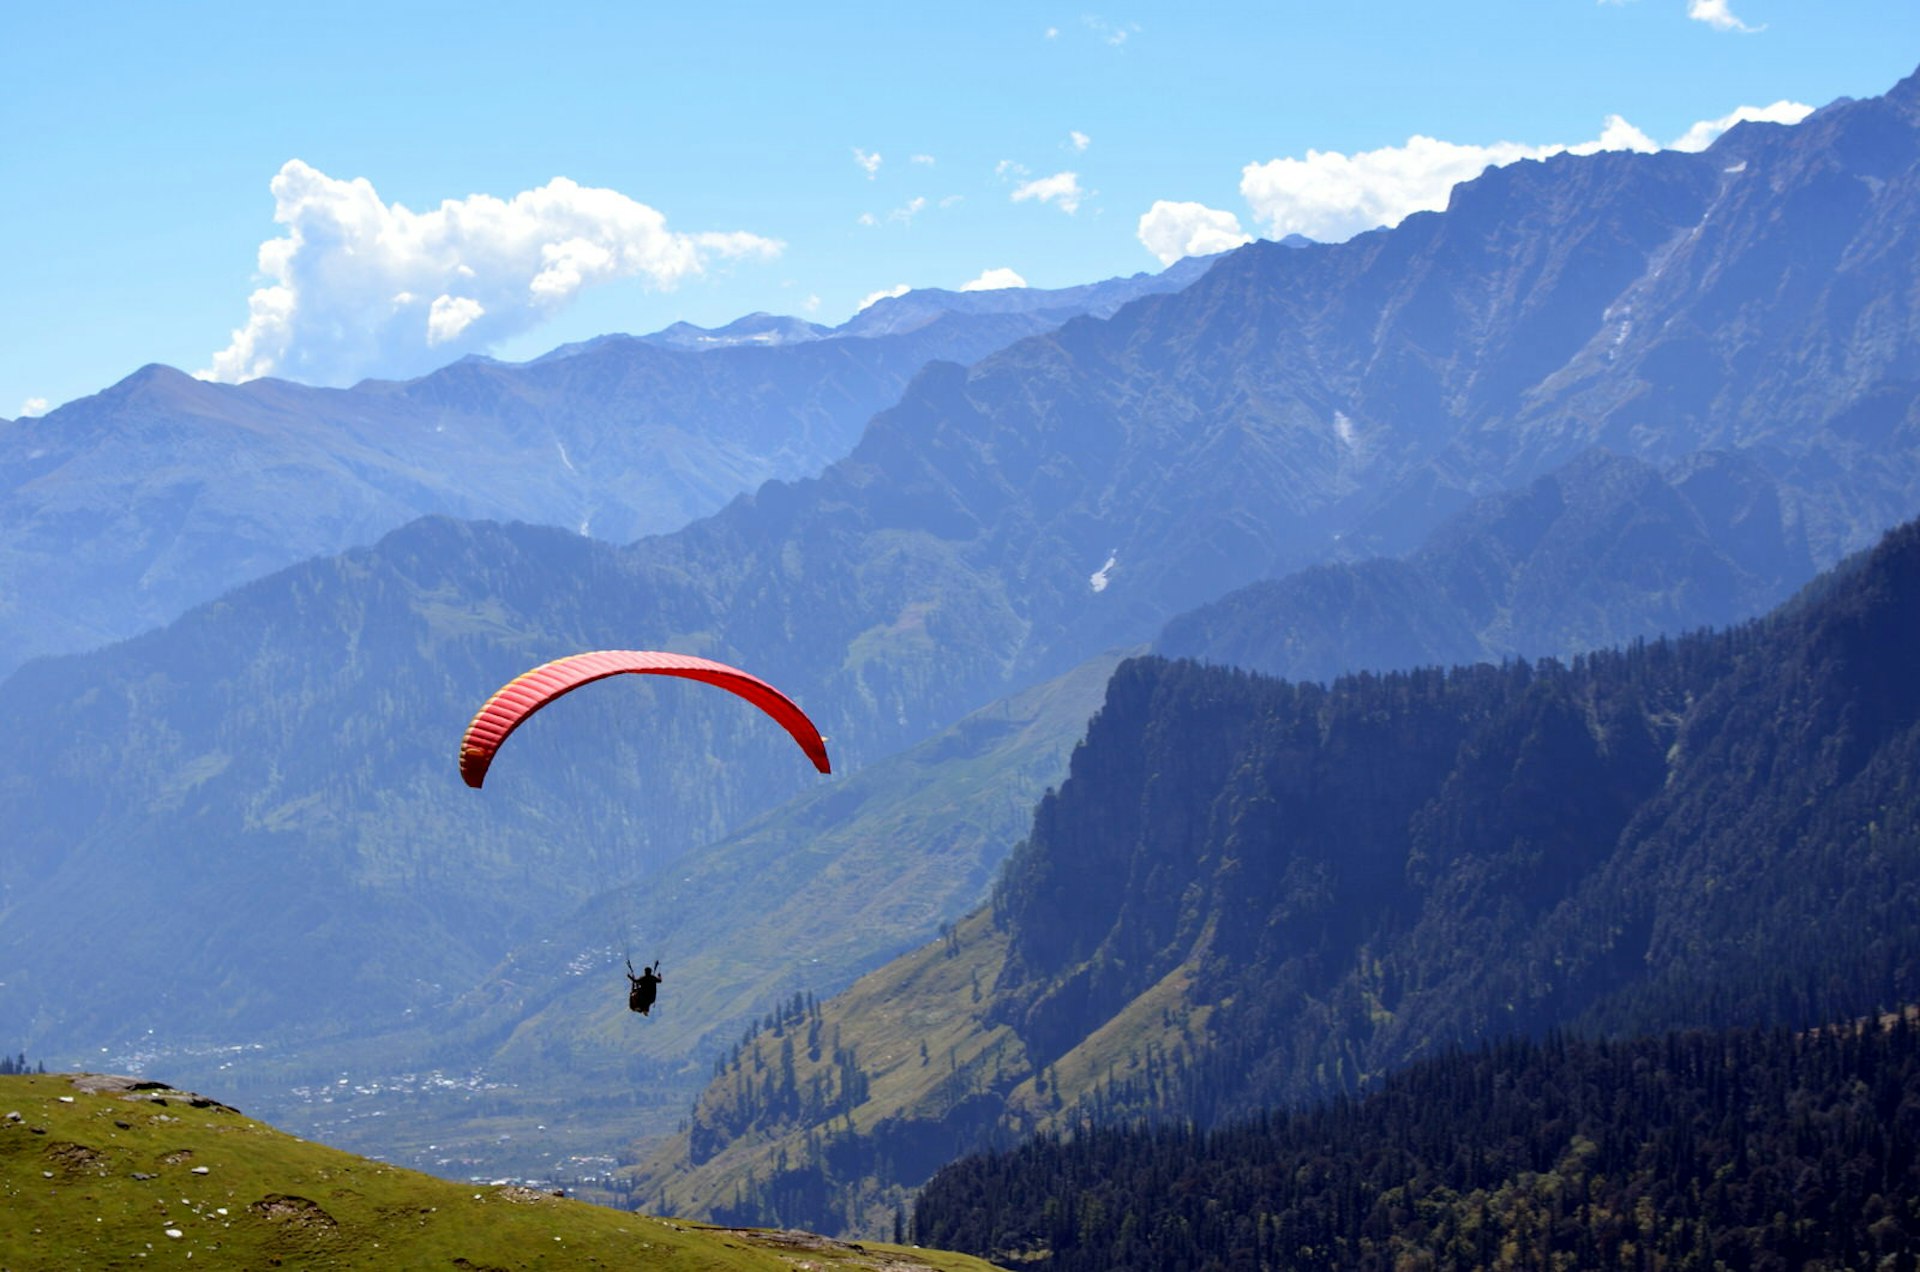 Paraglider against a backdrop of Himalayan hills in Himachal Pradesh